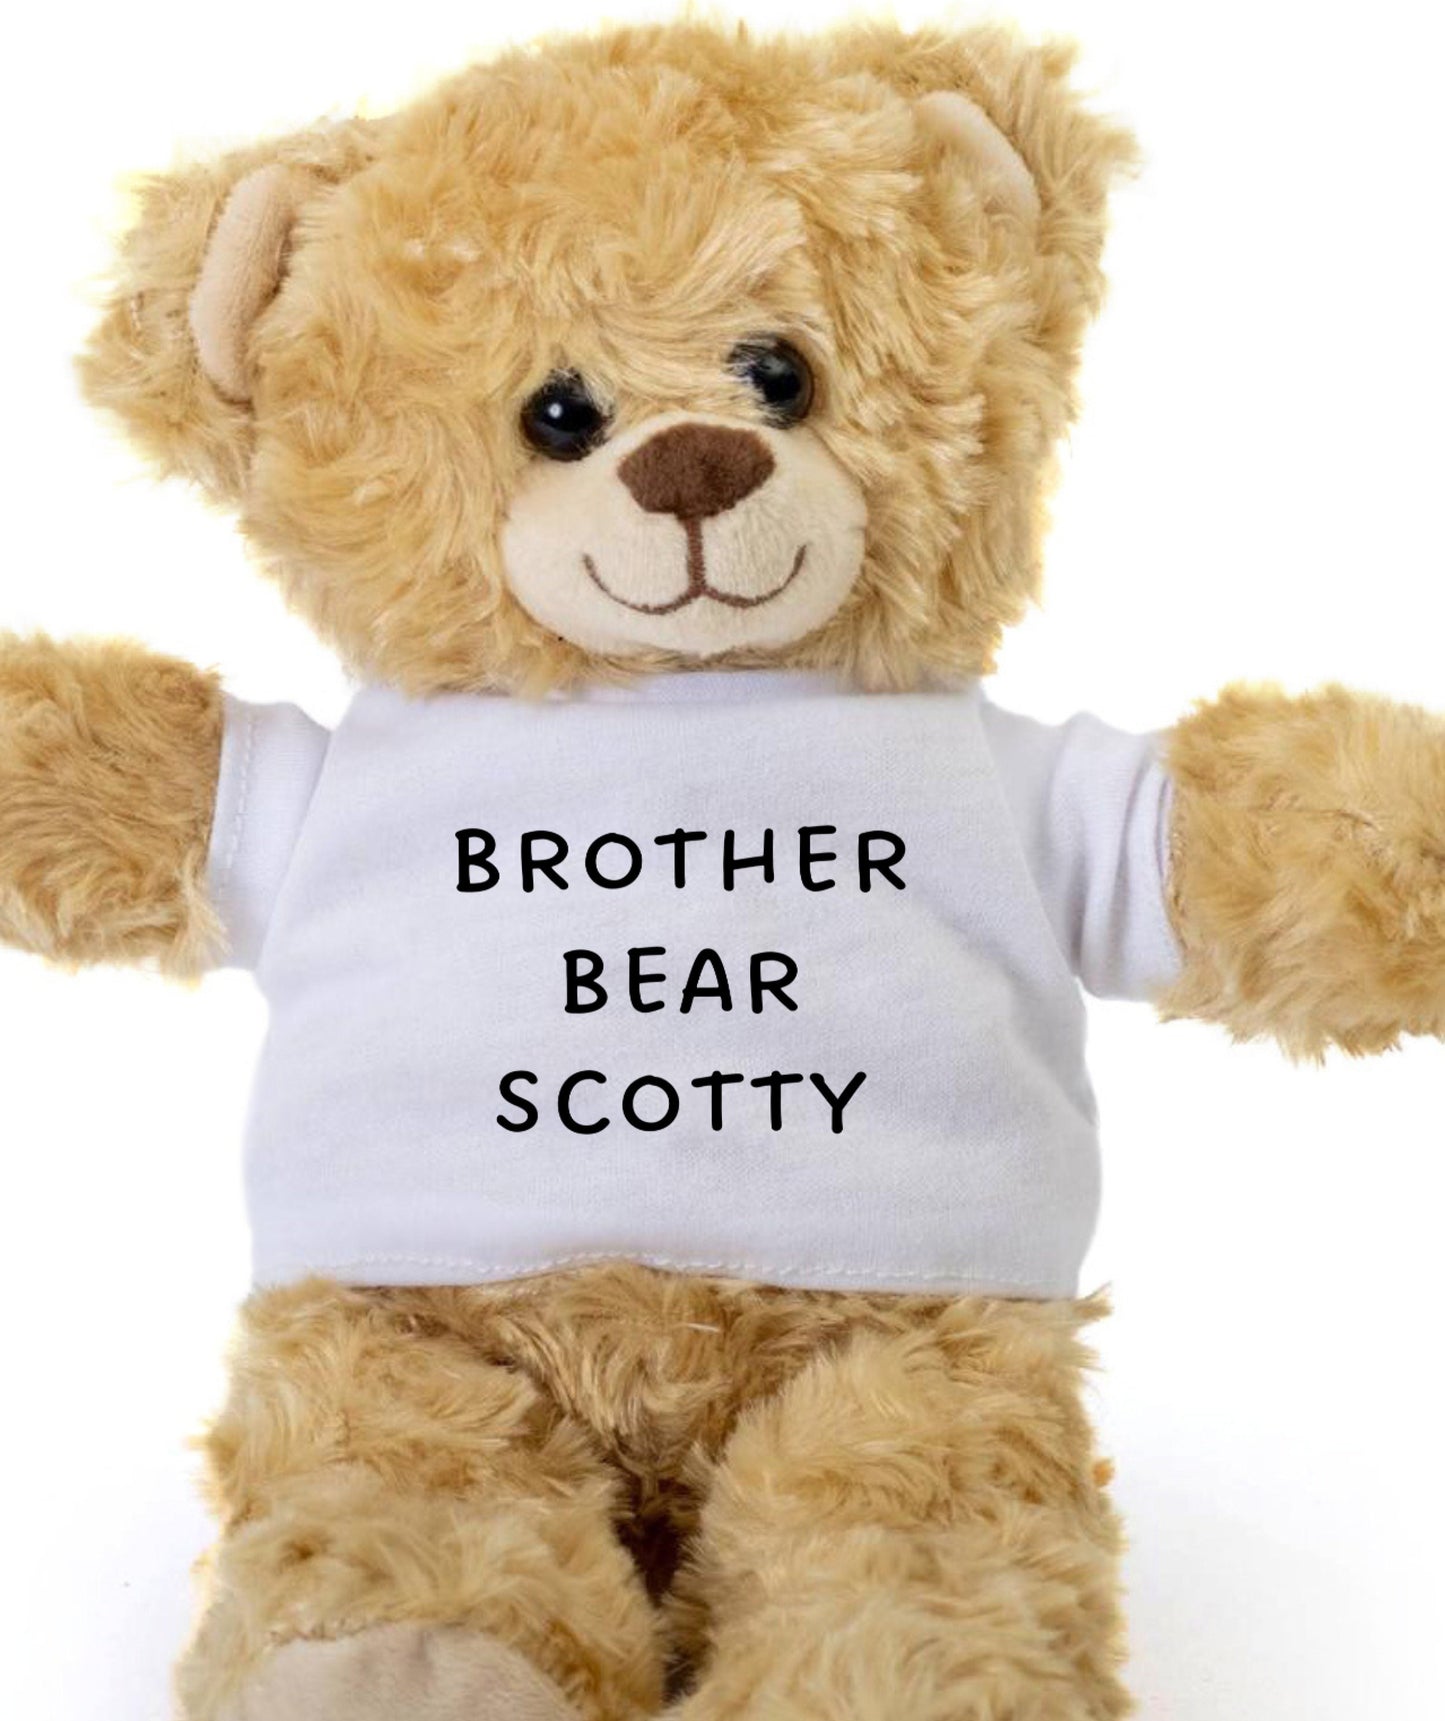 Personalized Sibling Teddy Bears, Little Sister, Big Sister, Little Brother, Big Brother, Customize Teddy Bears, Gift for Daughter, for Son